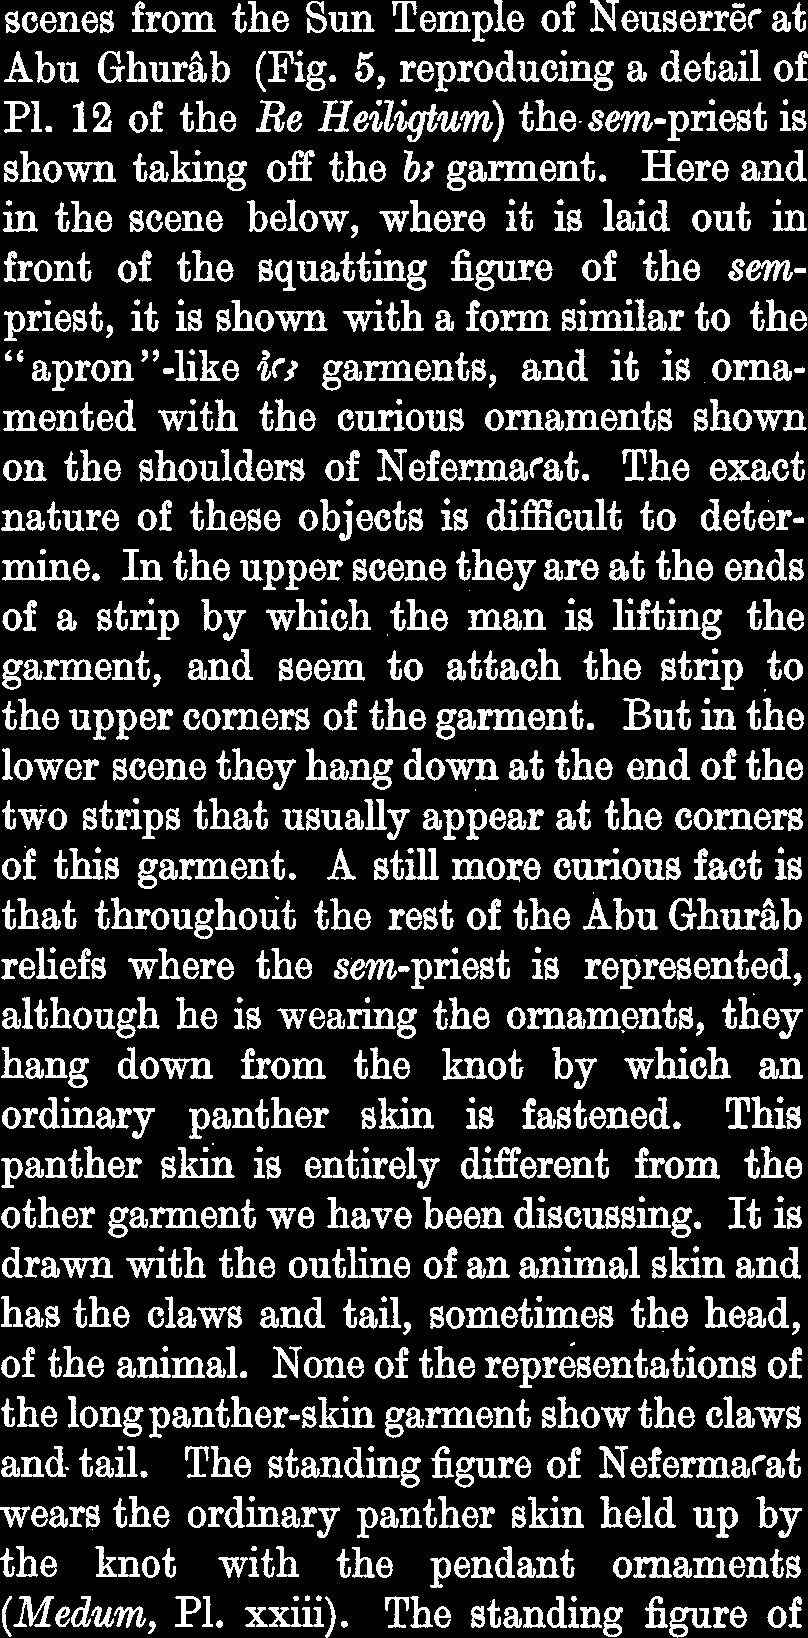 A still more curious fact is that throughout the rest of the Abu Ghurâb reliefs where the sem-priest is represented, although he is wearing the ornaments, they hang down from the knot by which an